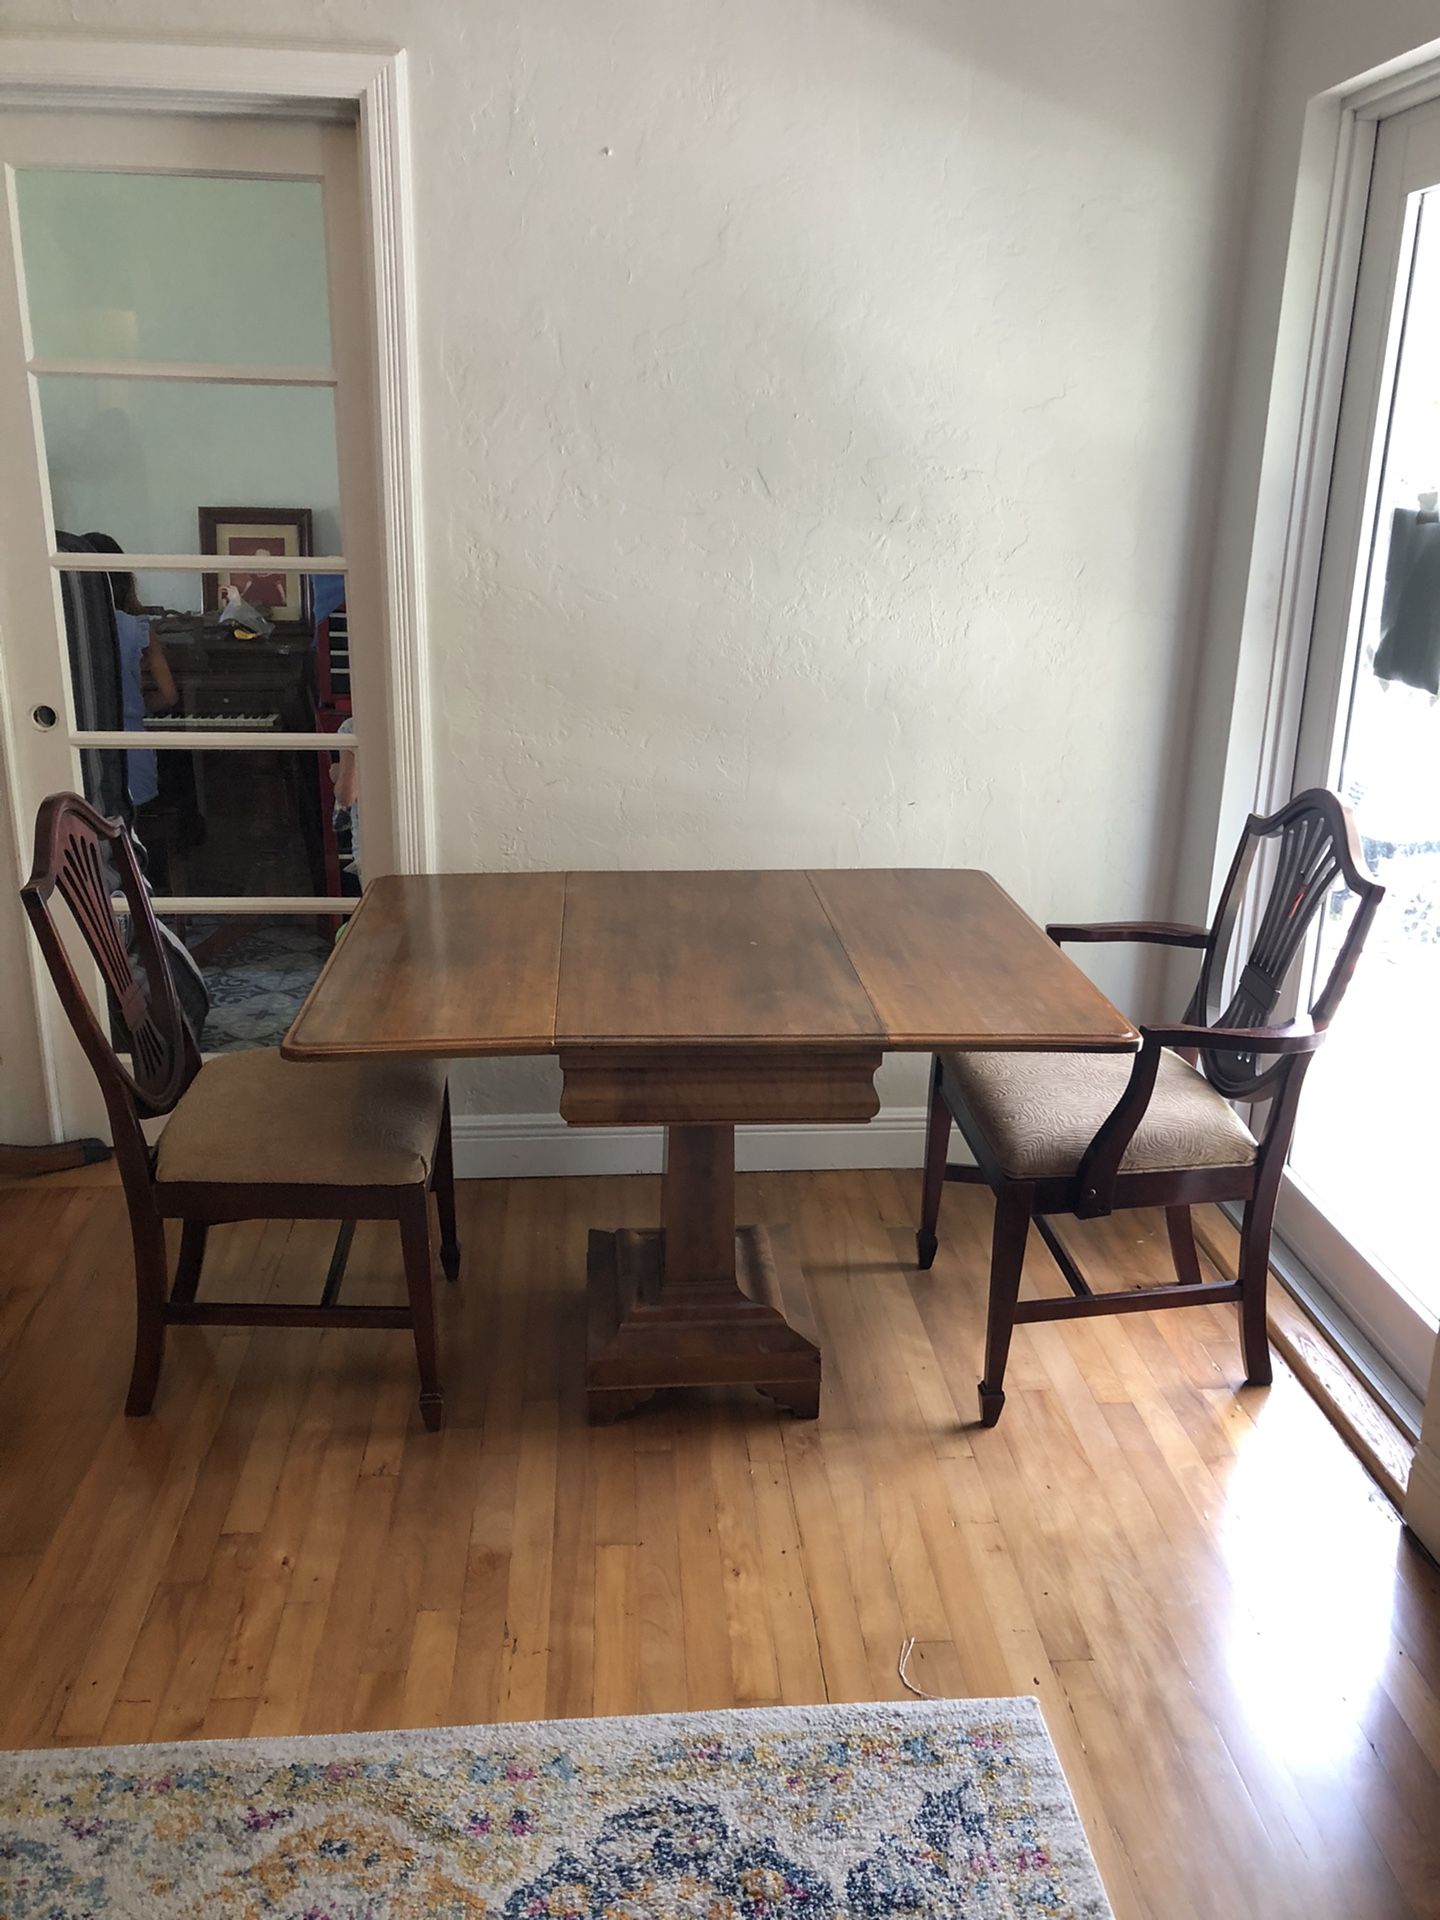 Solid wood kitchen table or dining table or side table.